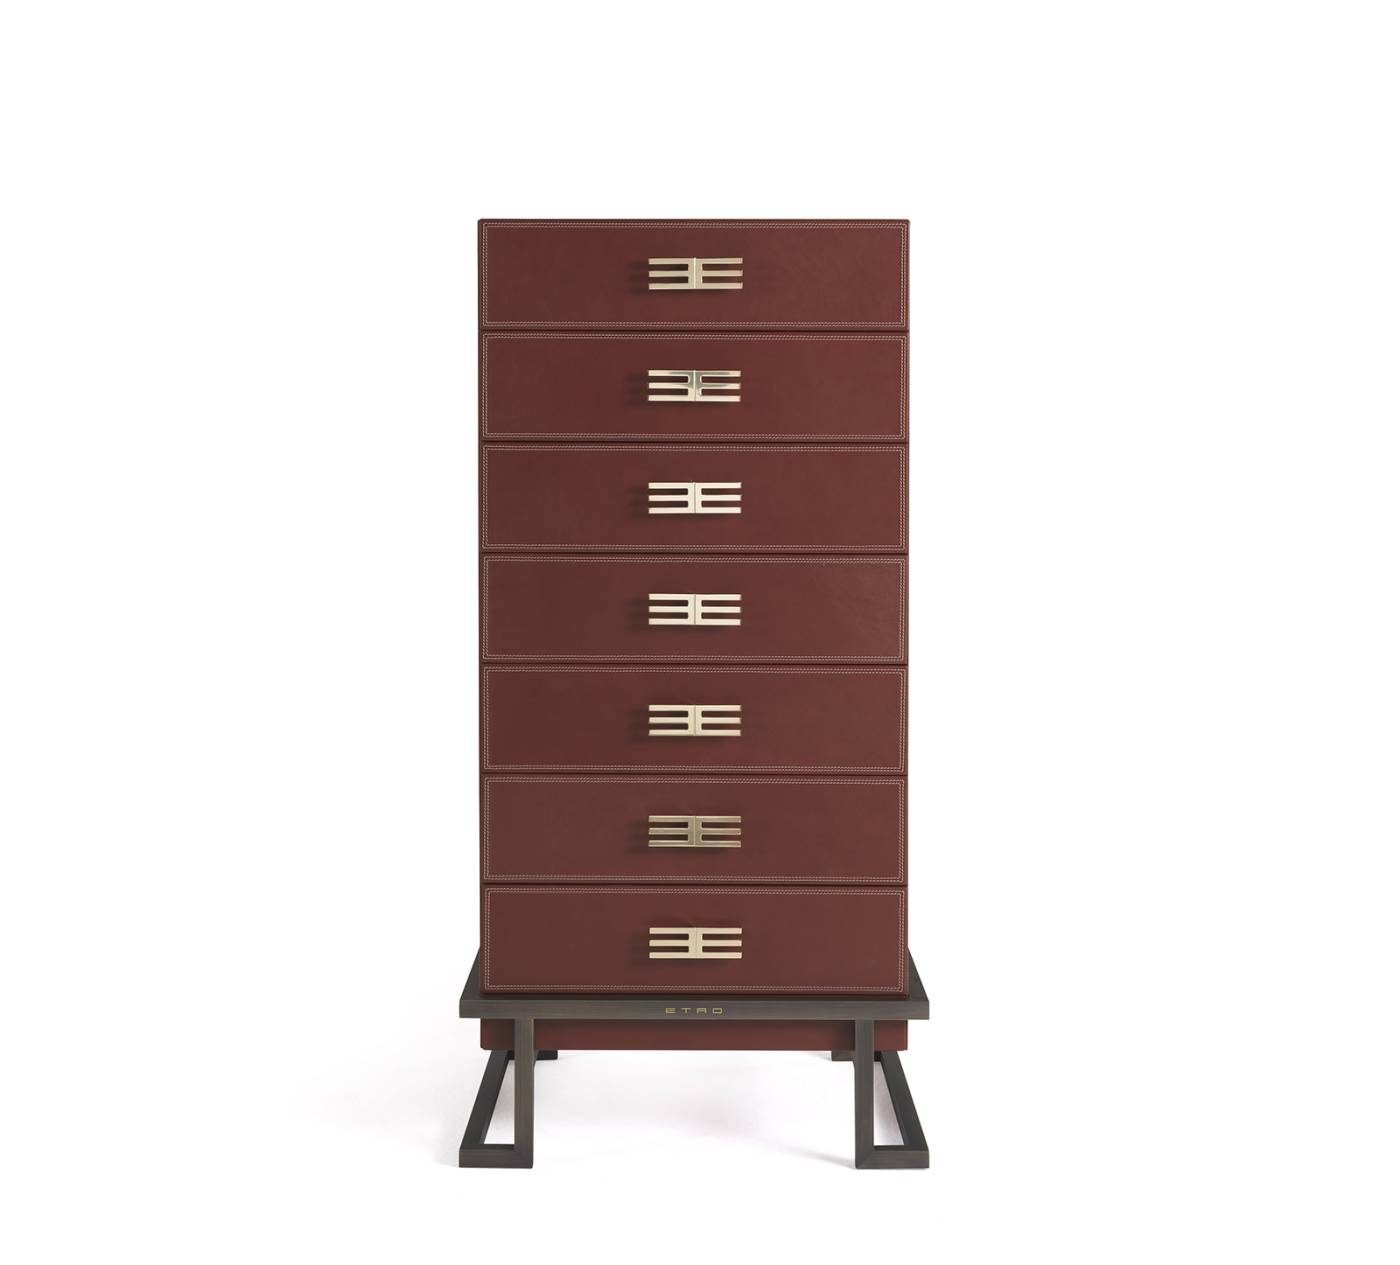 ETRO HOME INTERIORS_KOLKATA_tall chest of drawers_cover frontale.jpg